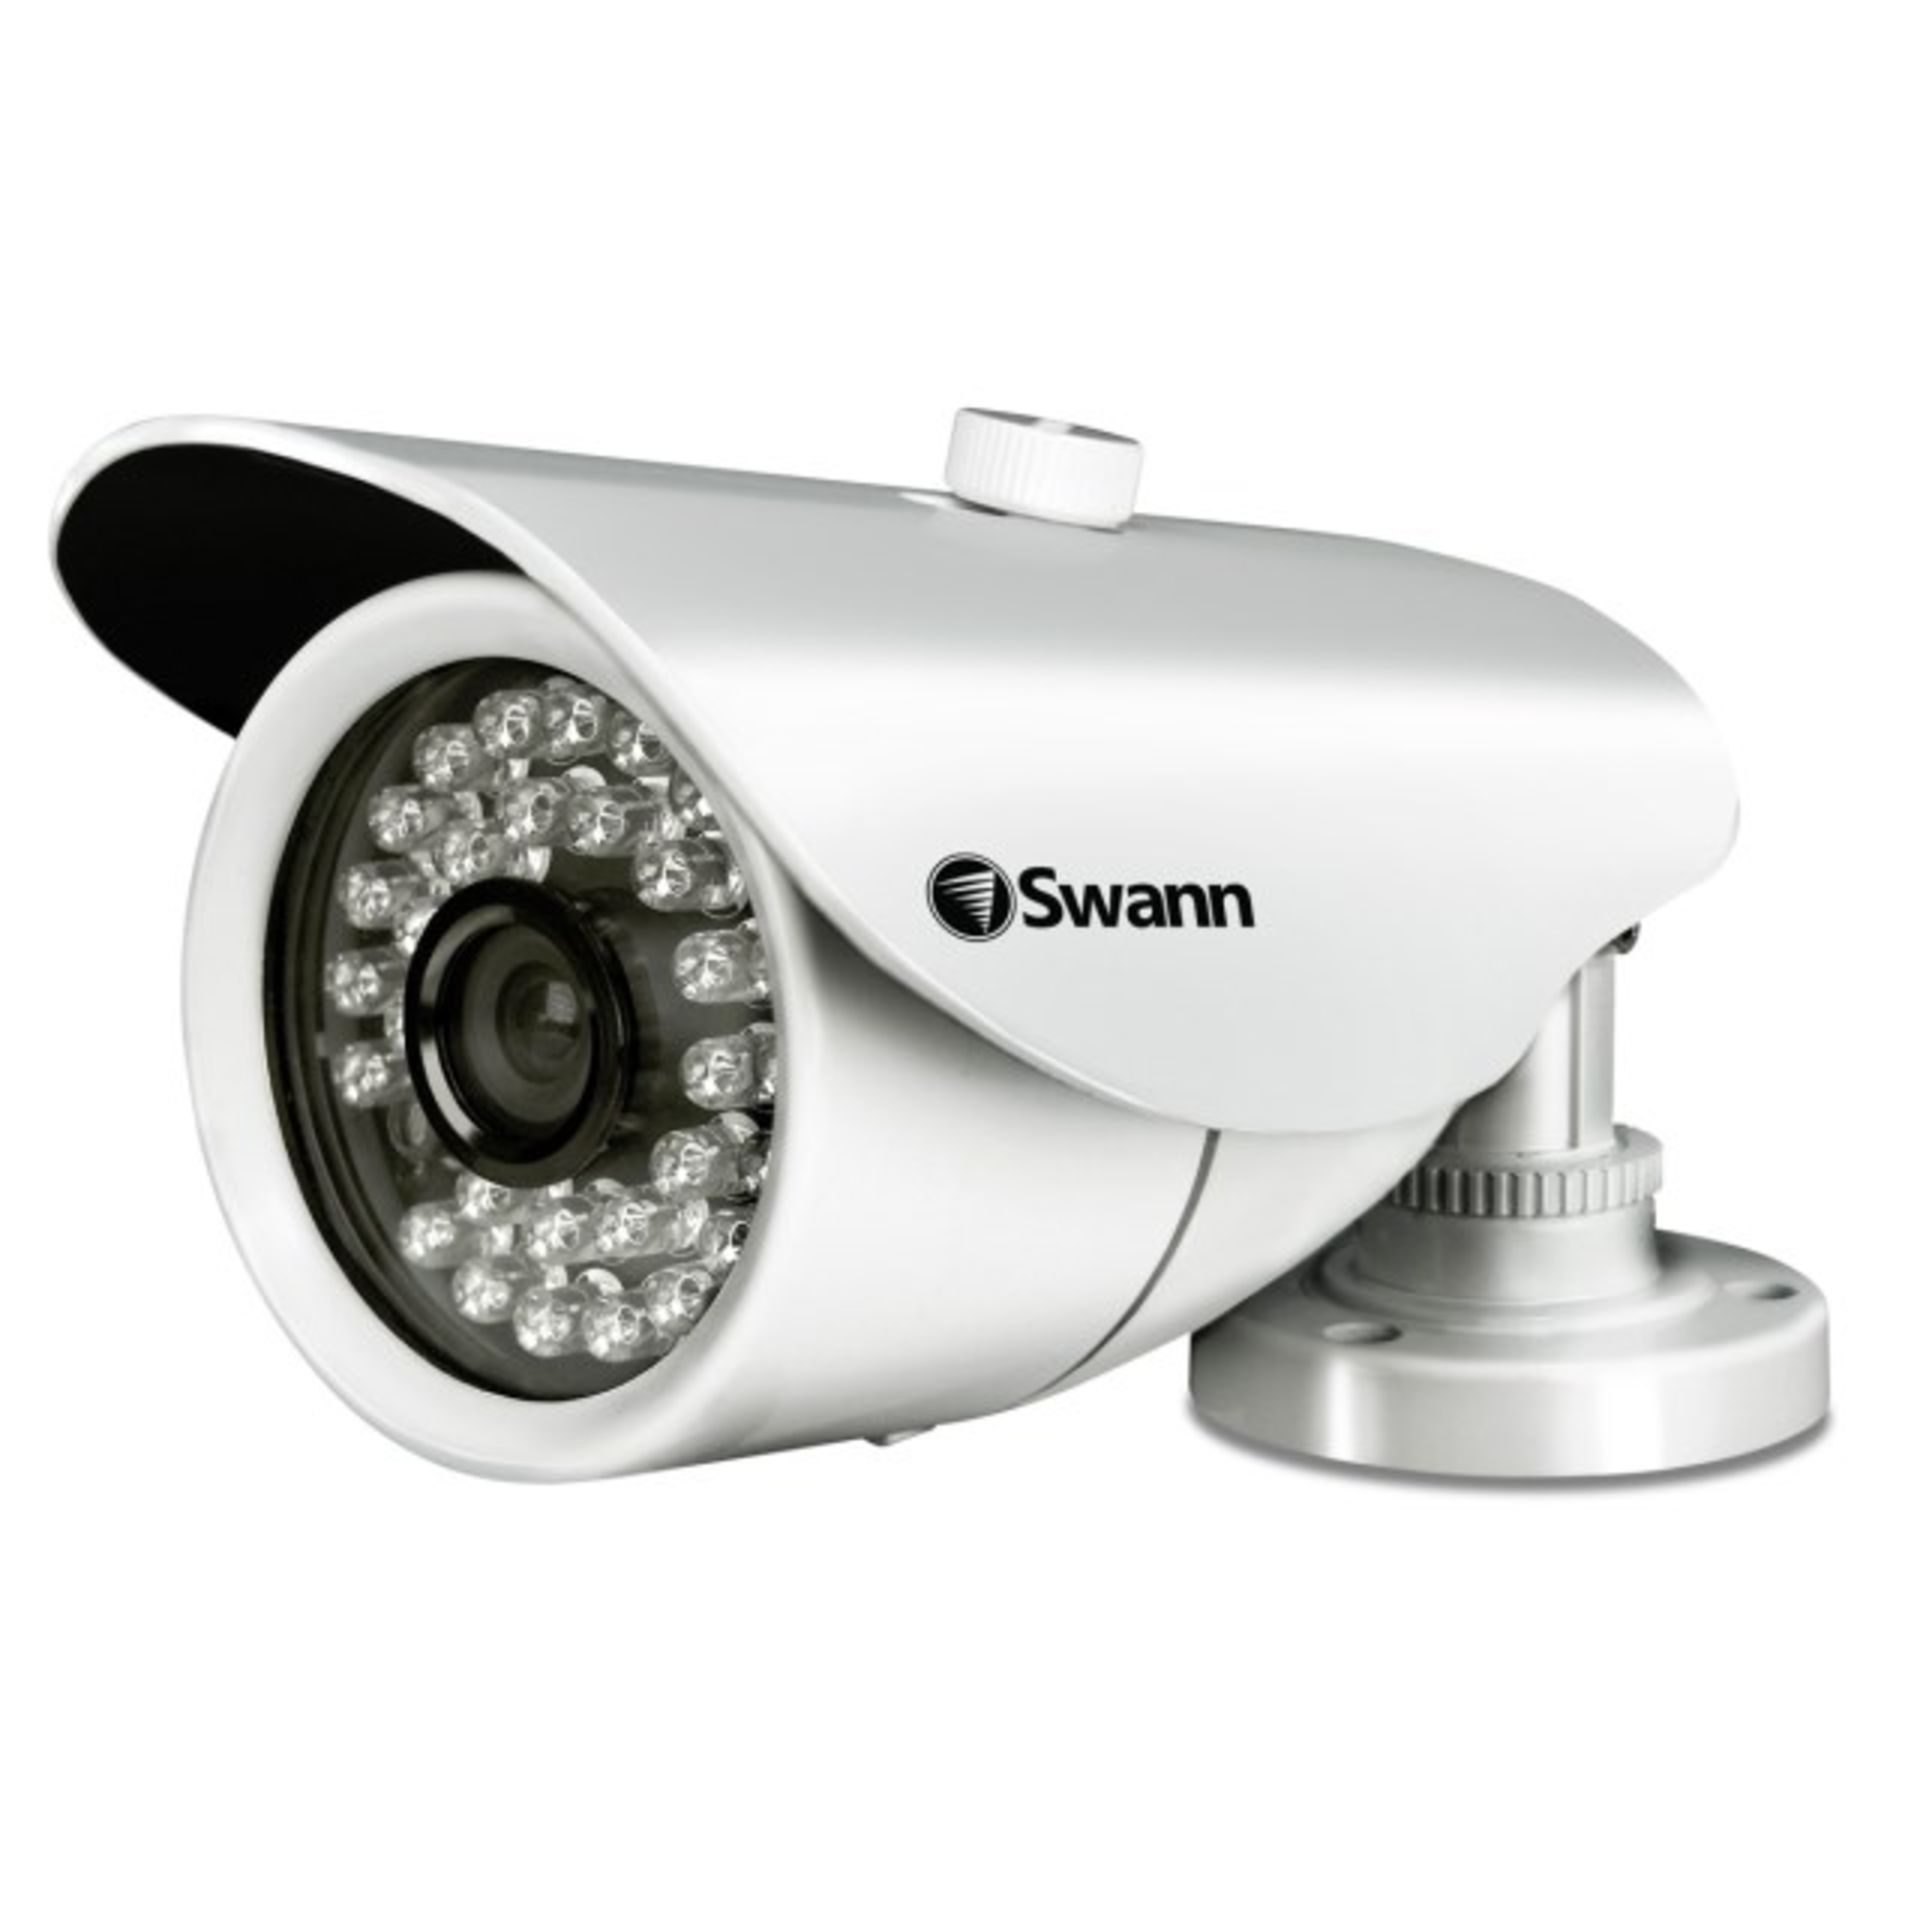 V *TRADE QTY* Grade B Swann SW-770 Professional Security Camera With Night Vision 115ft - Weather